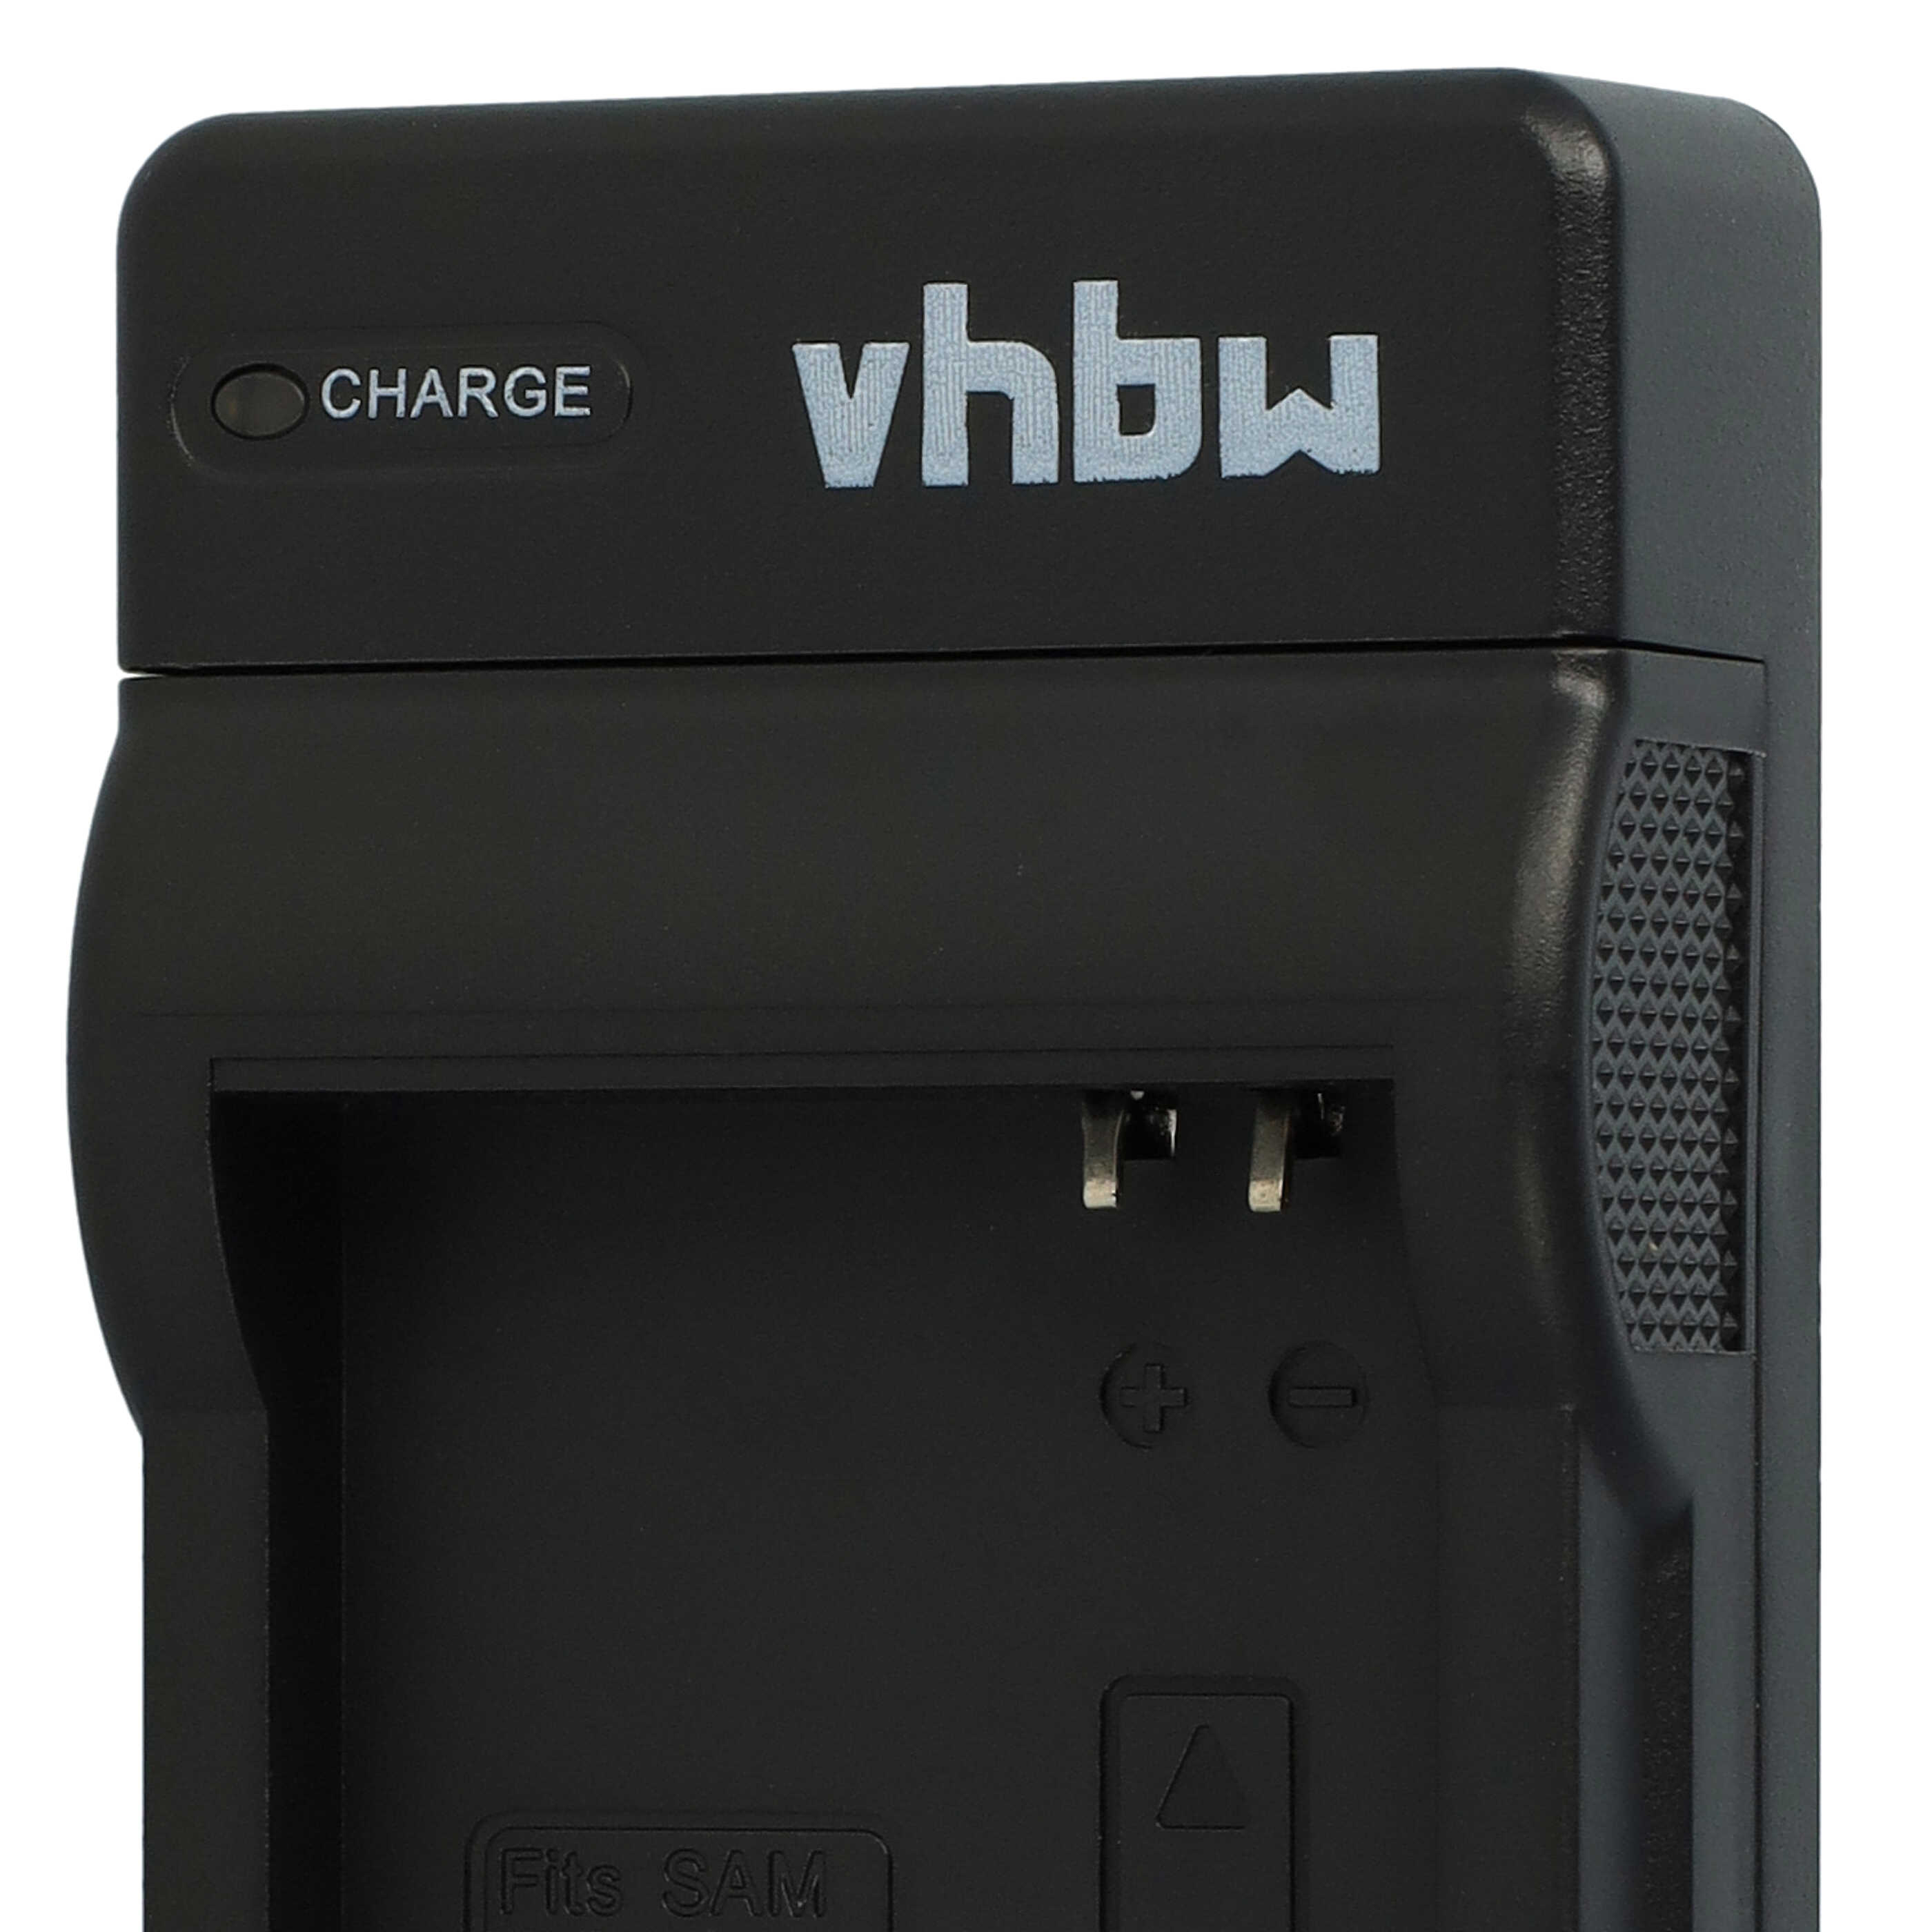 Battery Charger suitable for Samsung SLB-0937 Camera etc. - 0.5 A, 4.2 V